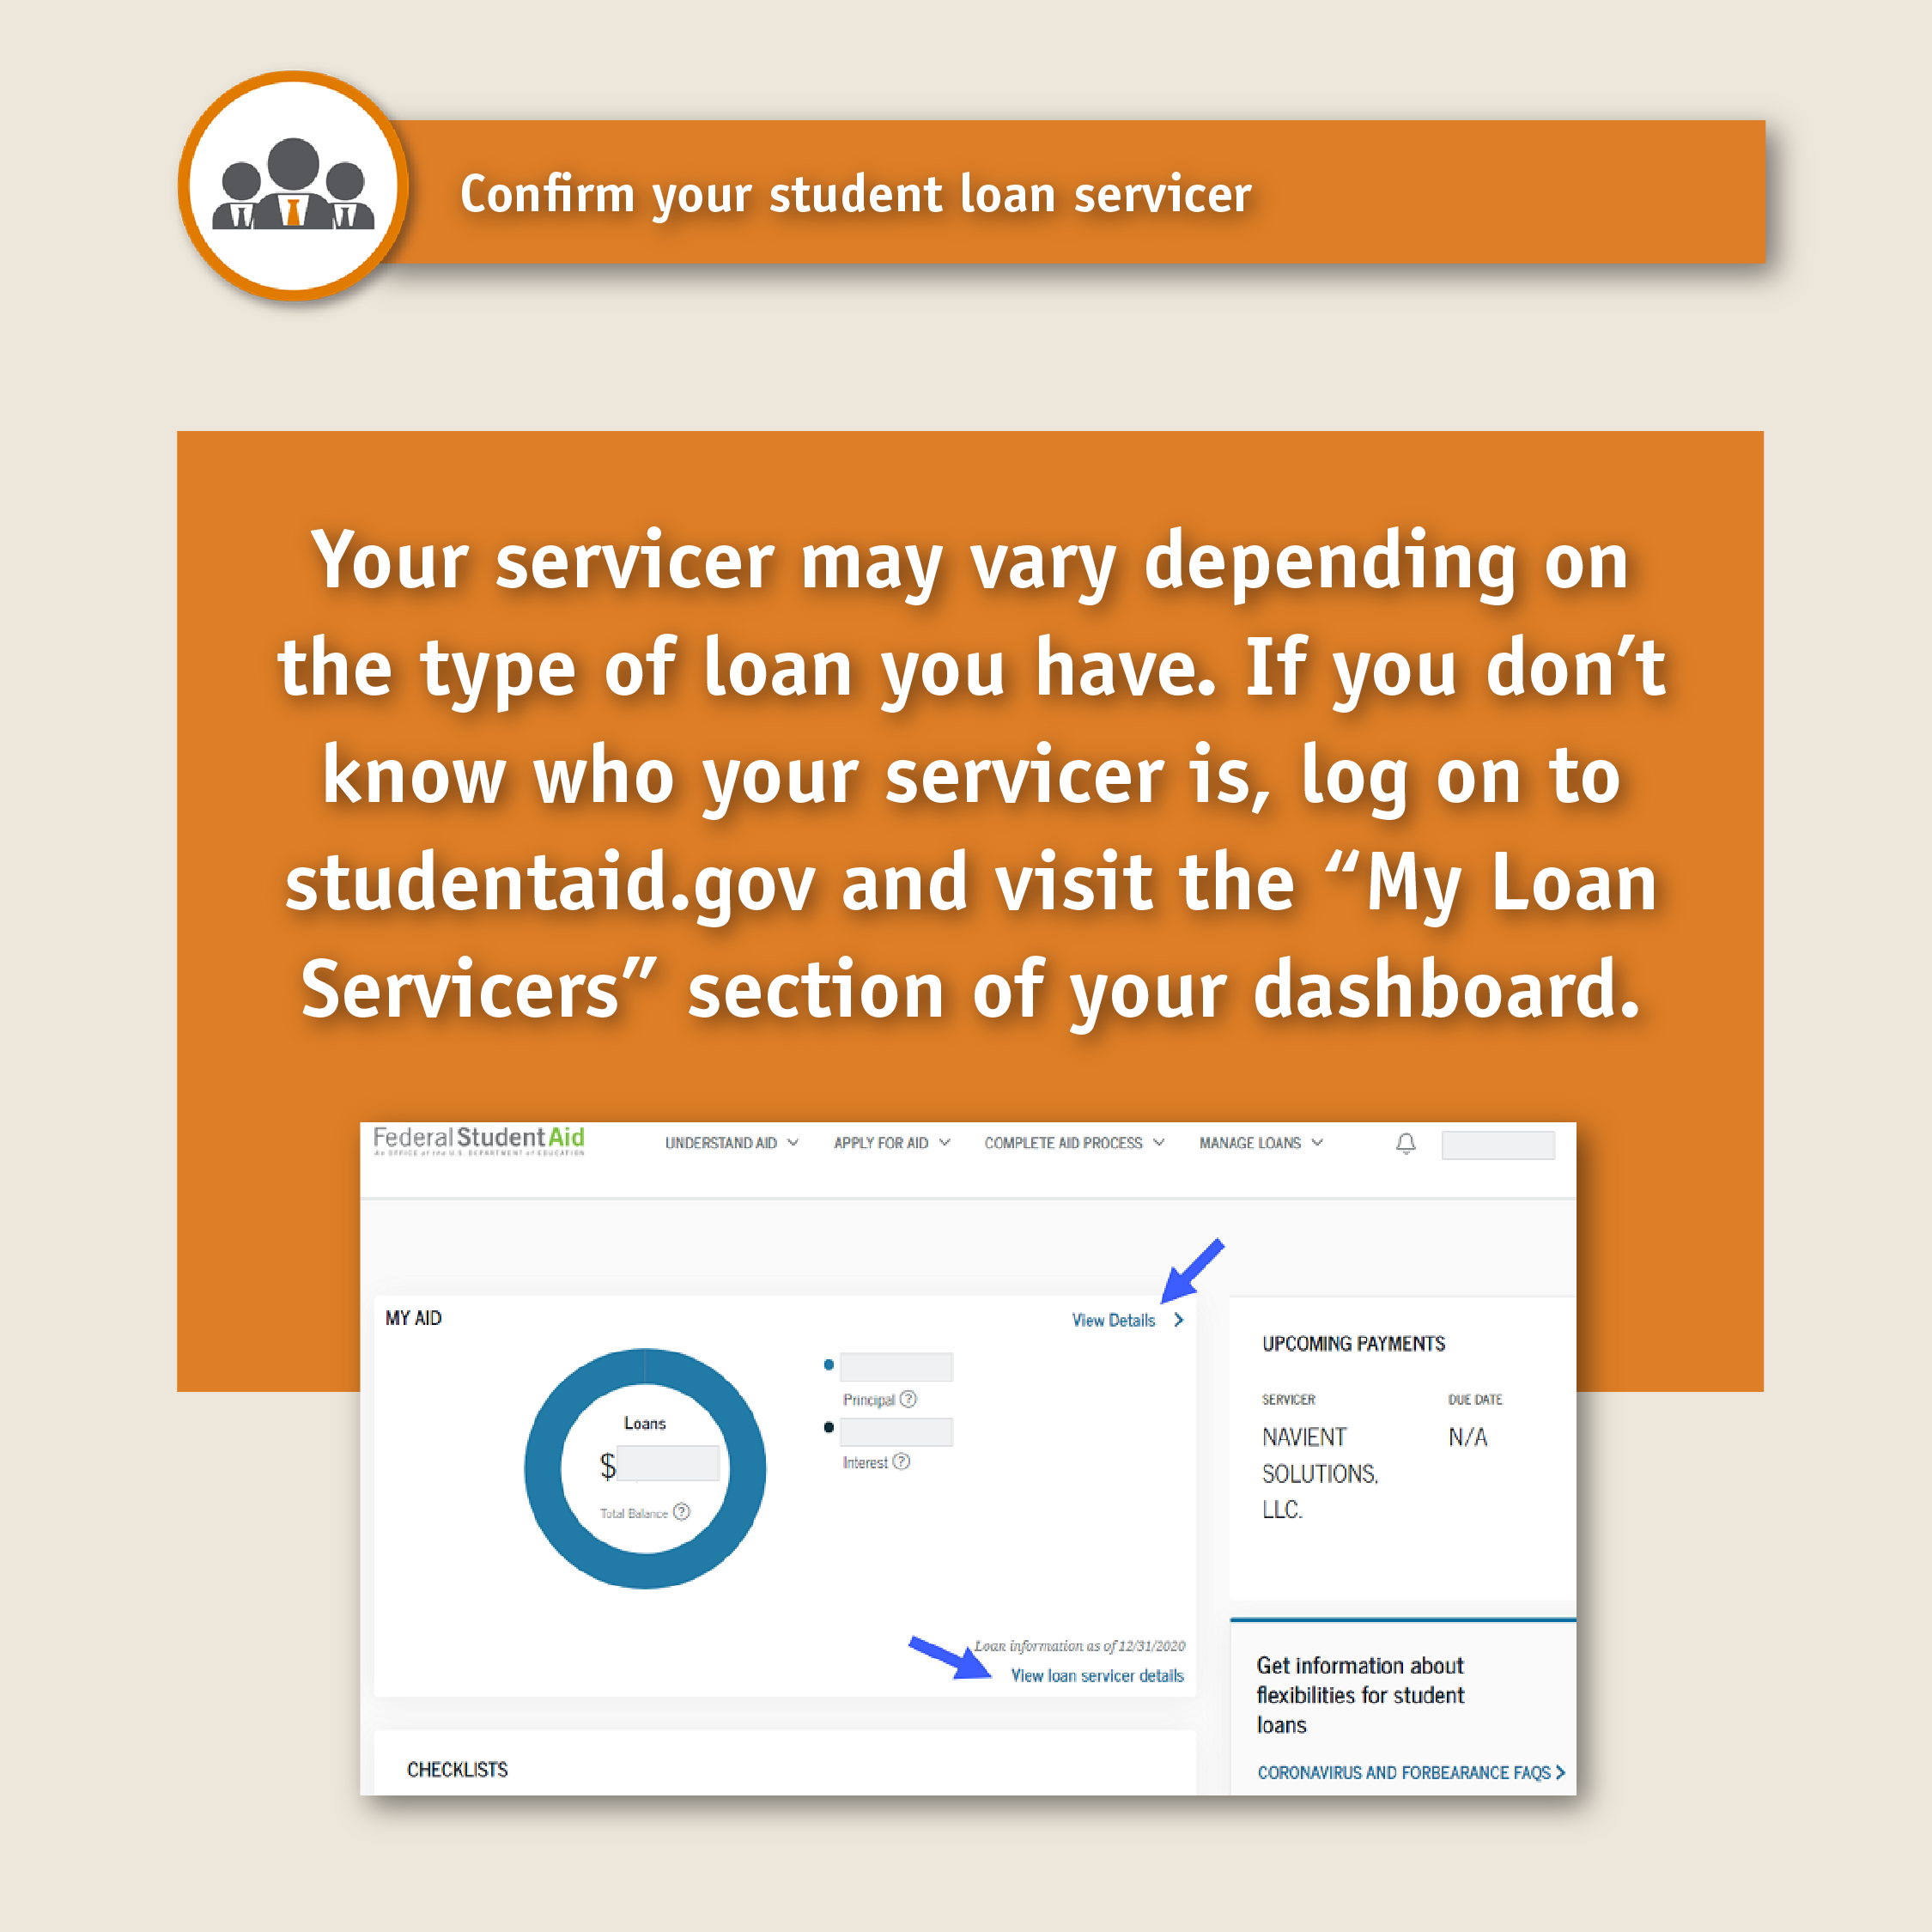 Confirm your student loan servicer. Text: Your servicer may vary depending on the type of loan you have. If you don't know who your servicer is, log on to studentaid.gov and visit the "My Loan Servicers" section of your dashboard.